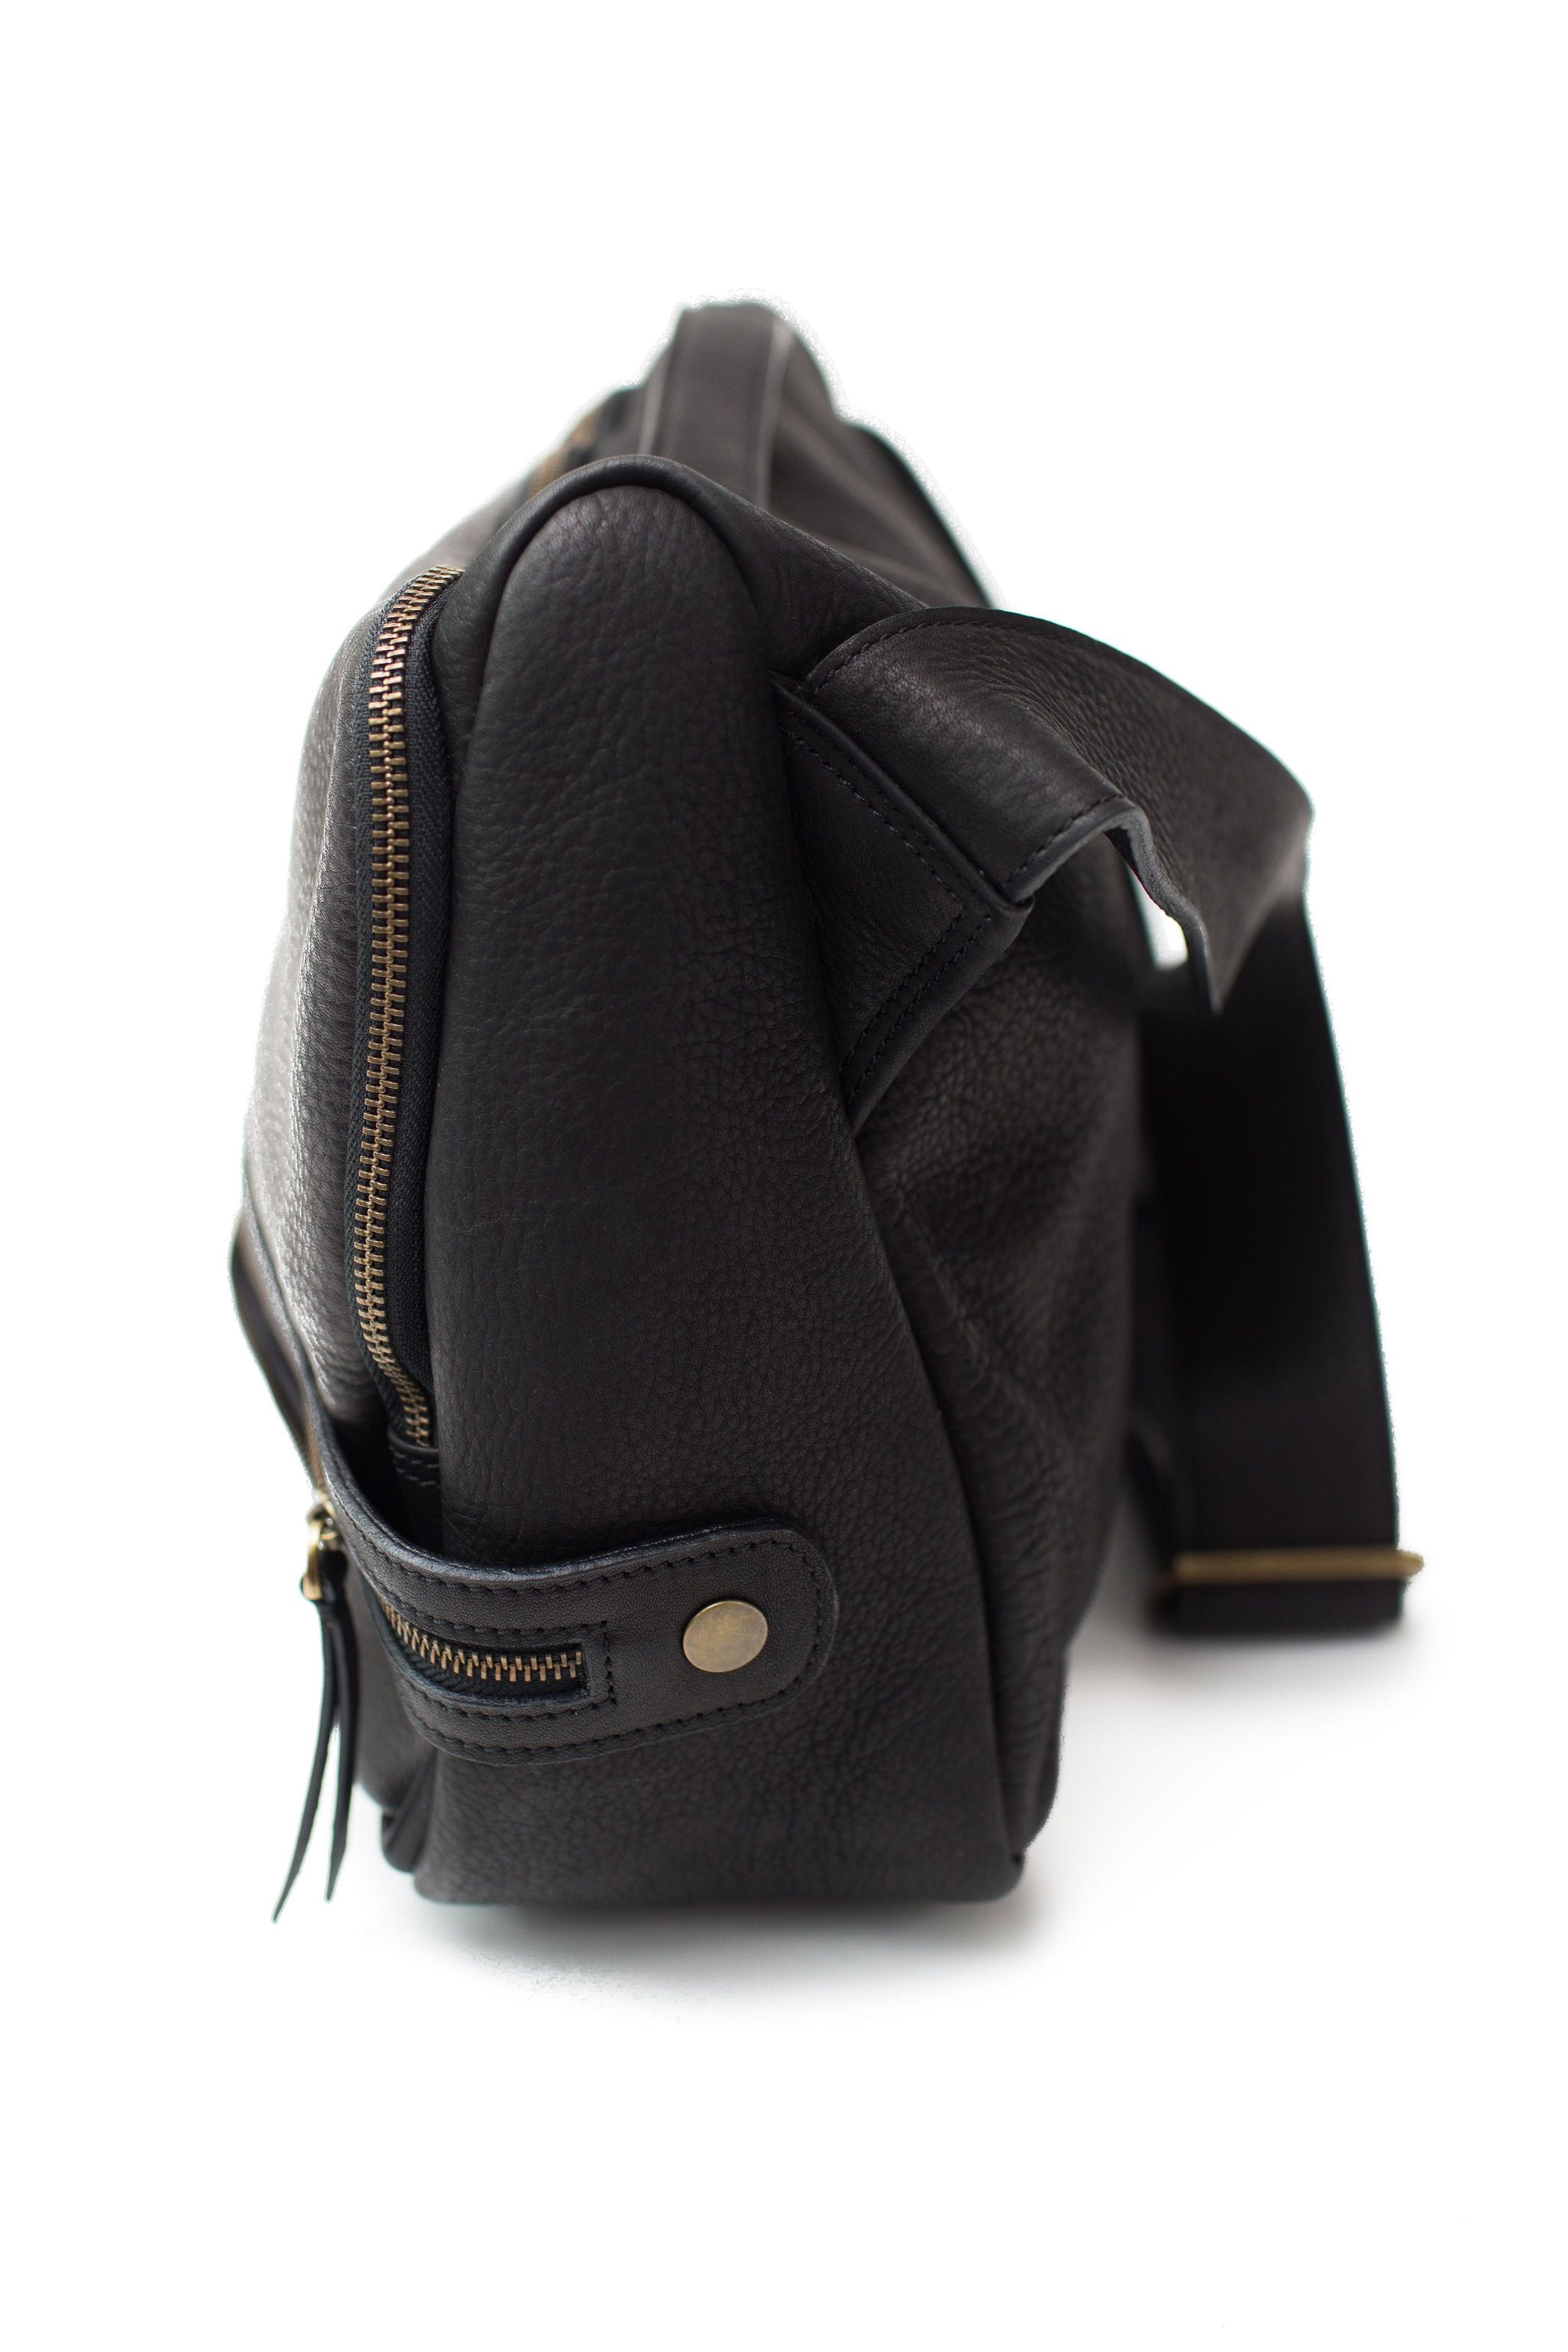 The side profile of the Rapinoe unisex messenger bag in black raw leather is clean and classic.